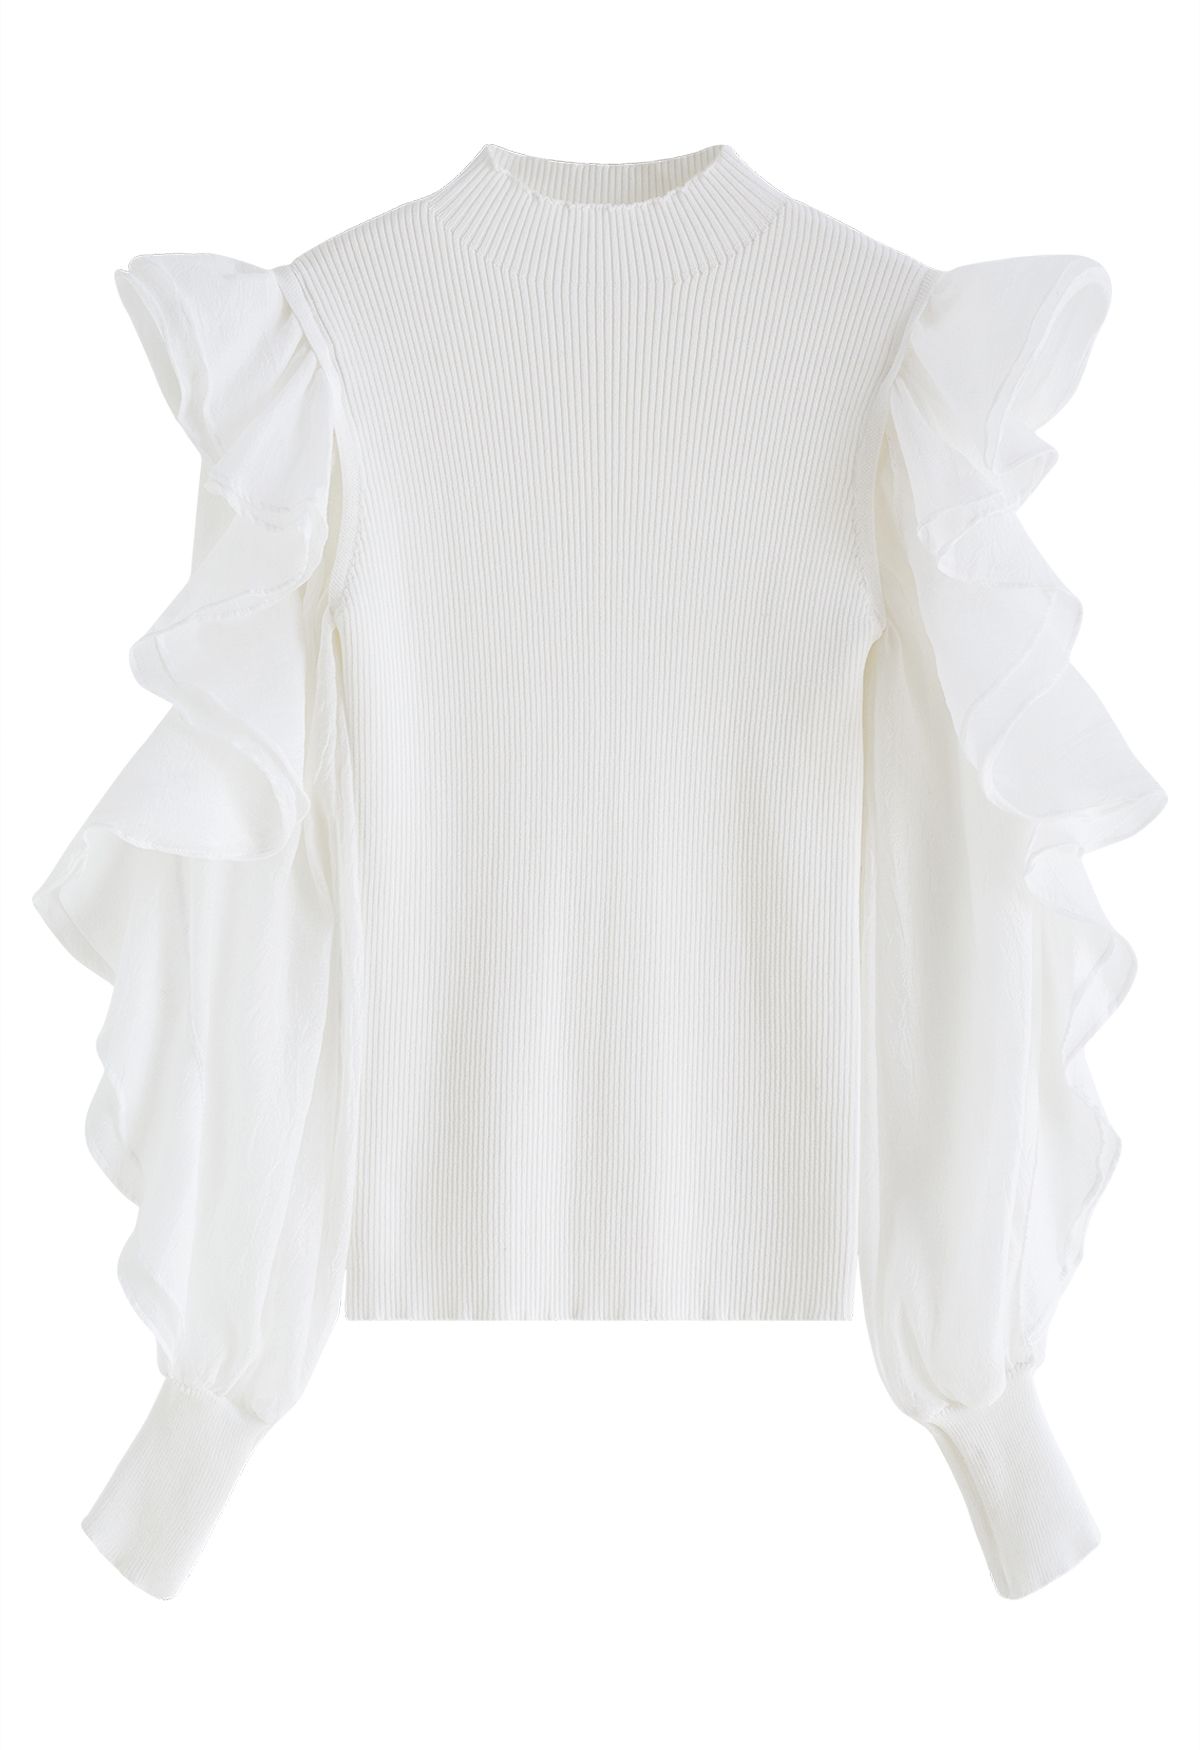 Tiered Ruffle Sleeves Spliced Knit Top in White - Retro, Indie and ...